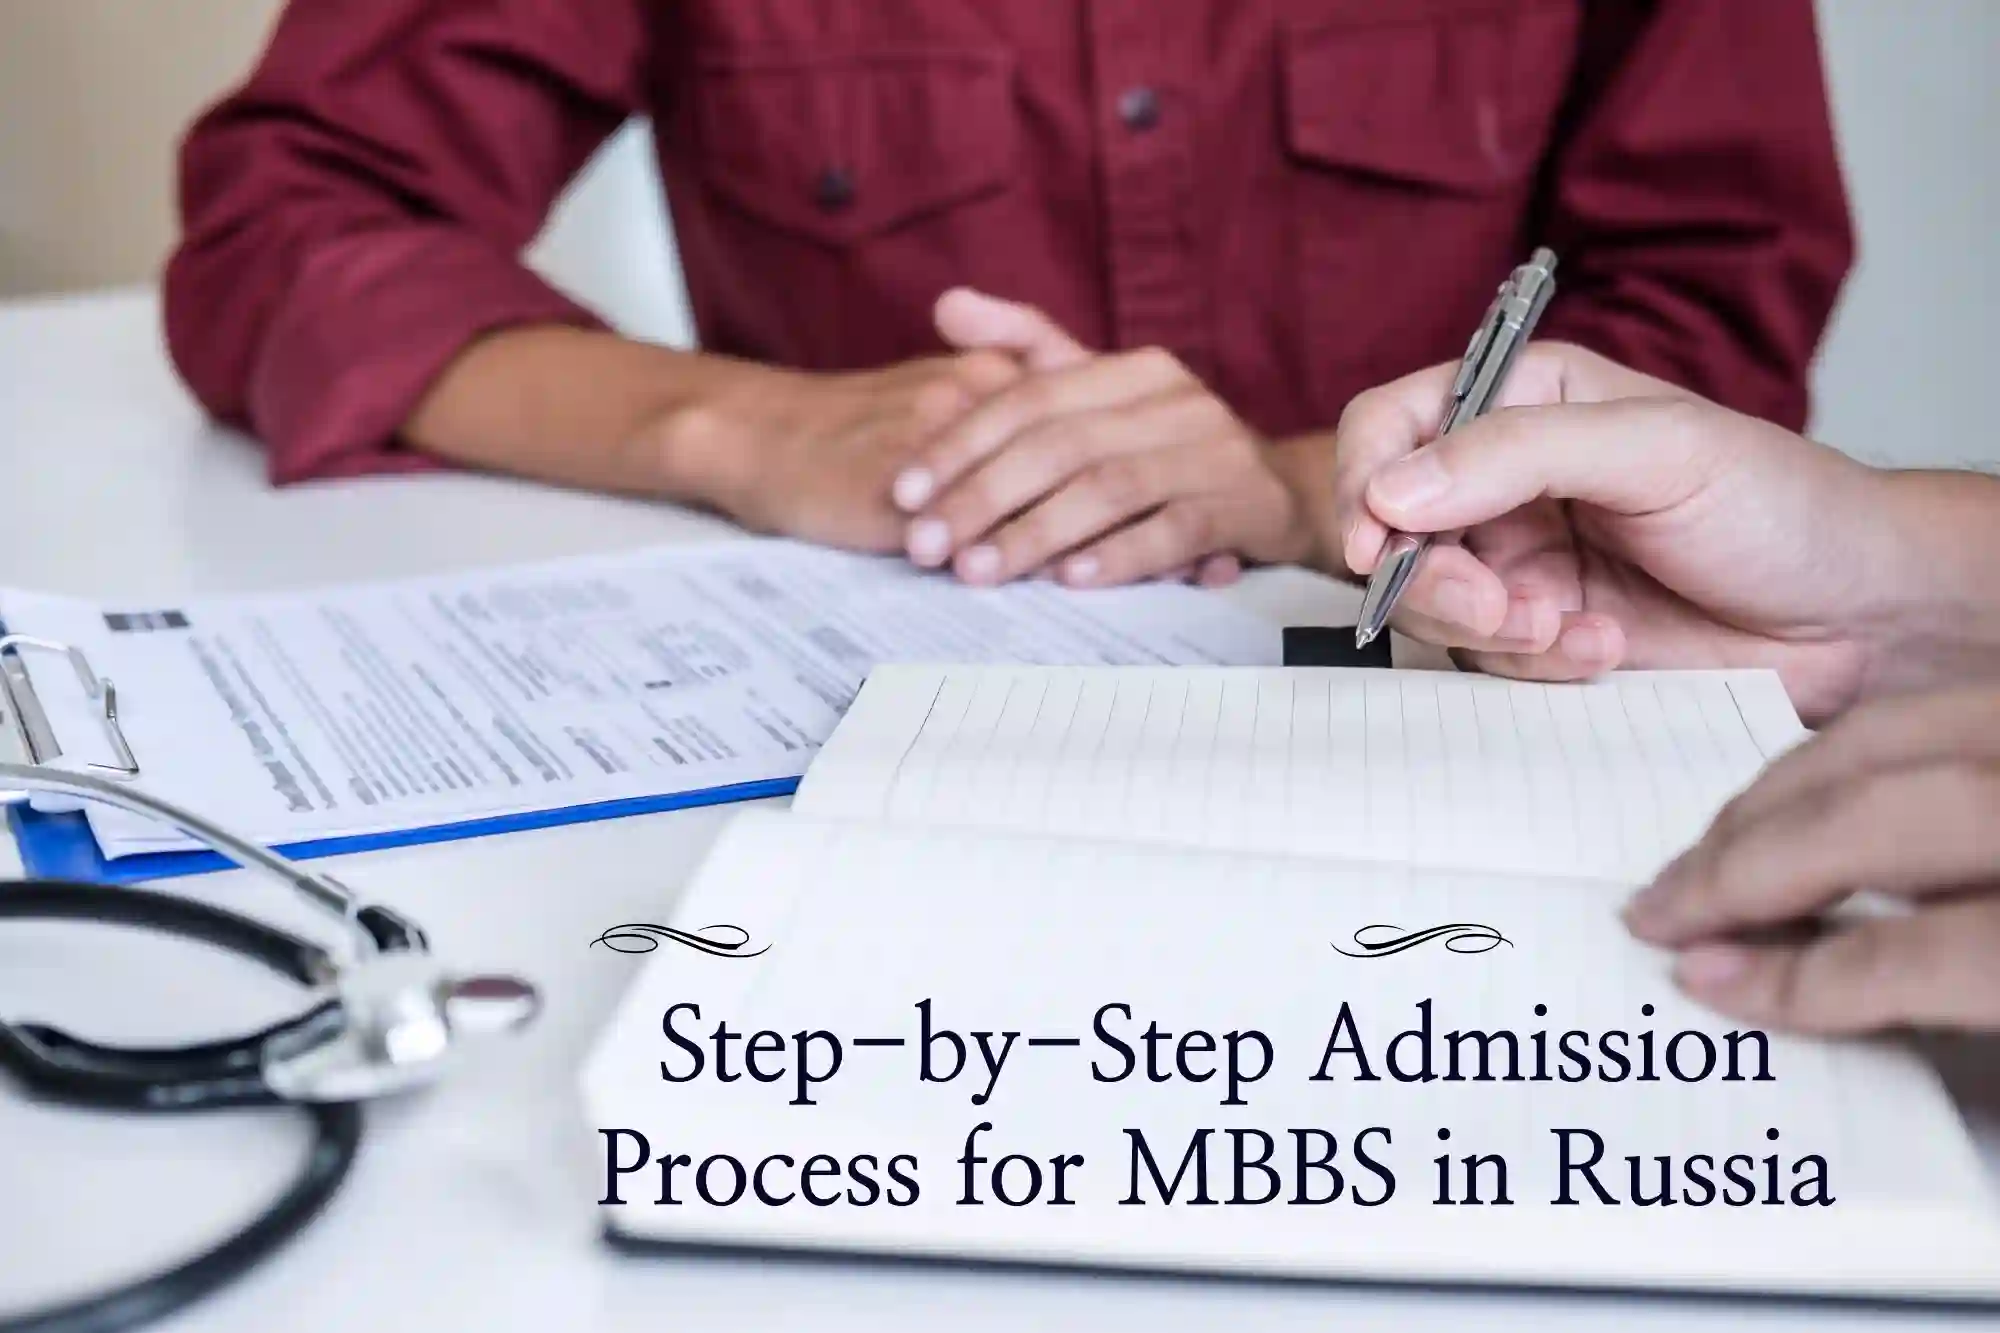 Step-by-Step Admission Process for MBBS in Russia post thumbnail image